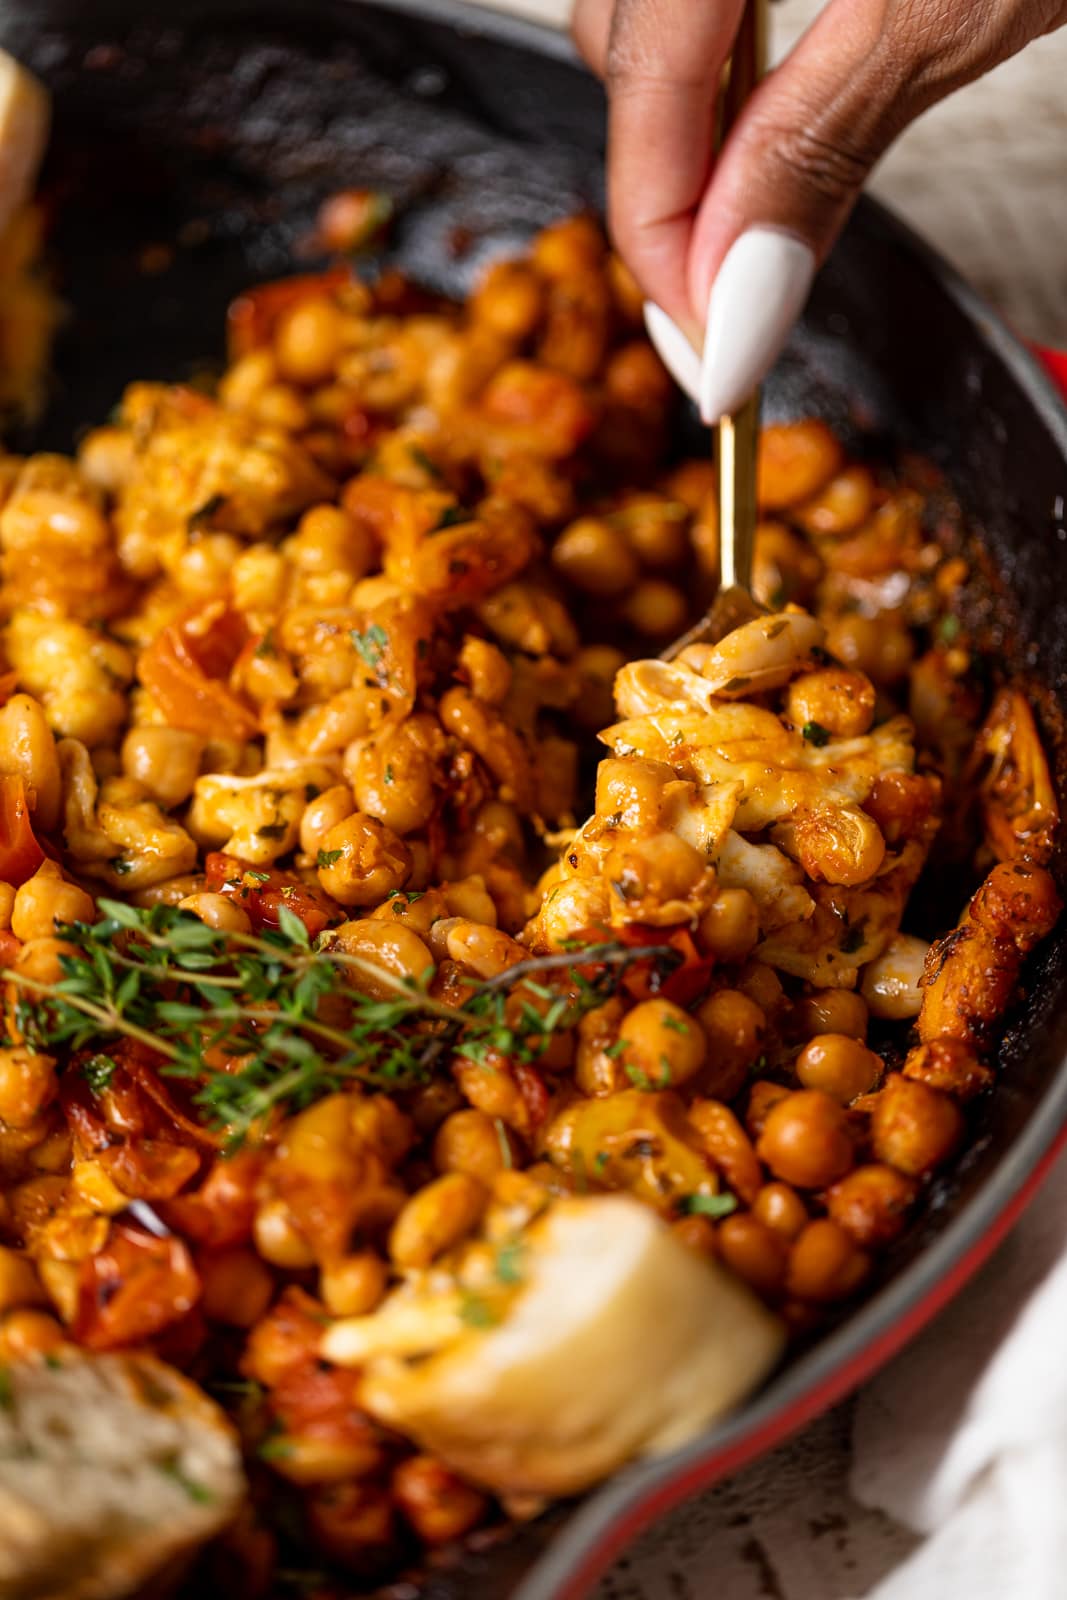 Saucy Baked Chickpea + White Beans (One Pot)